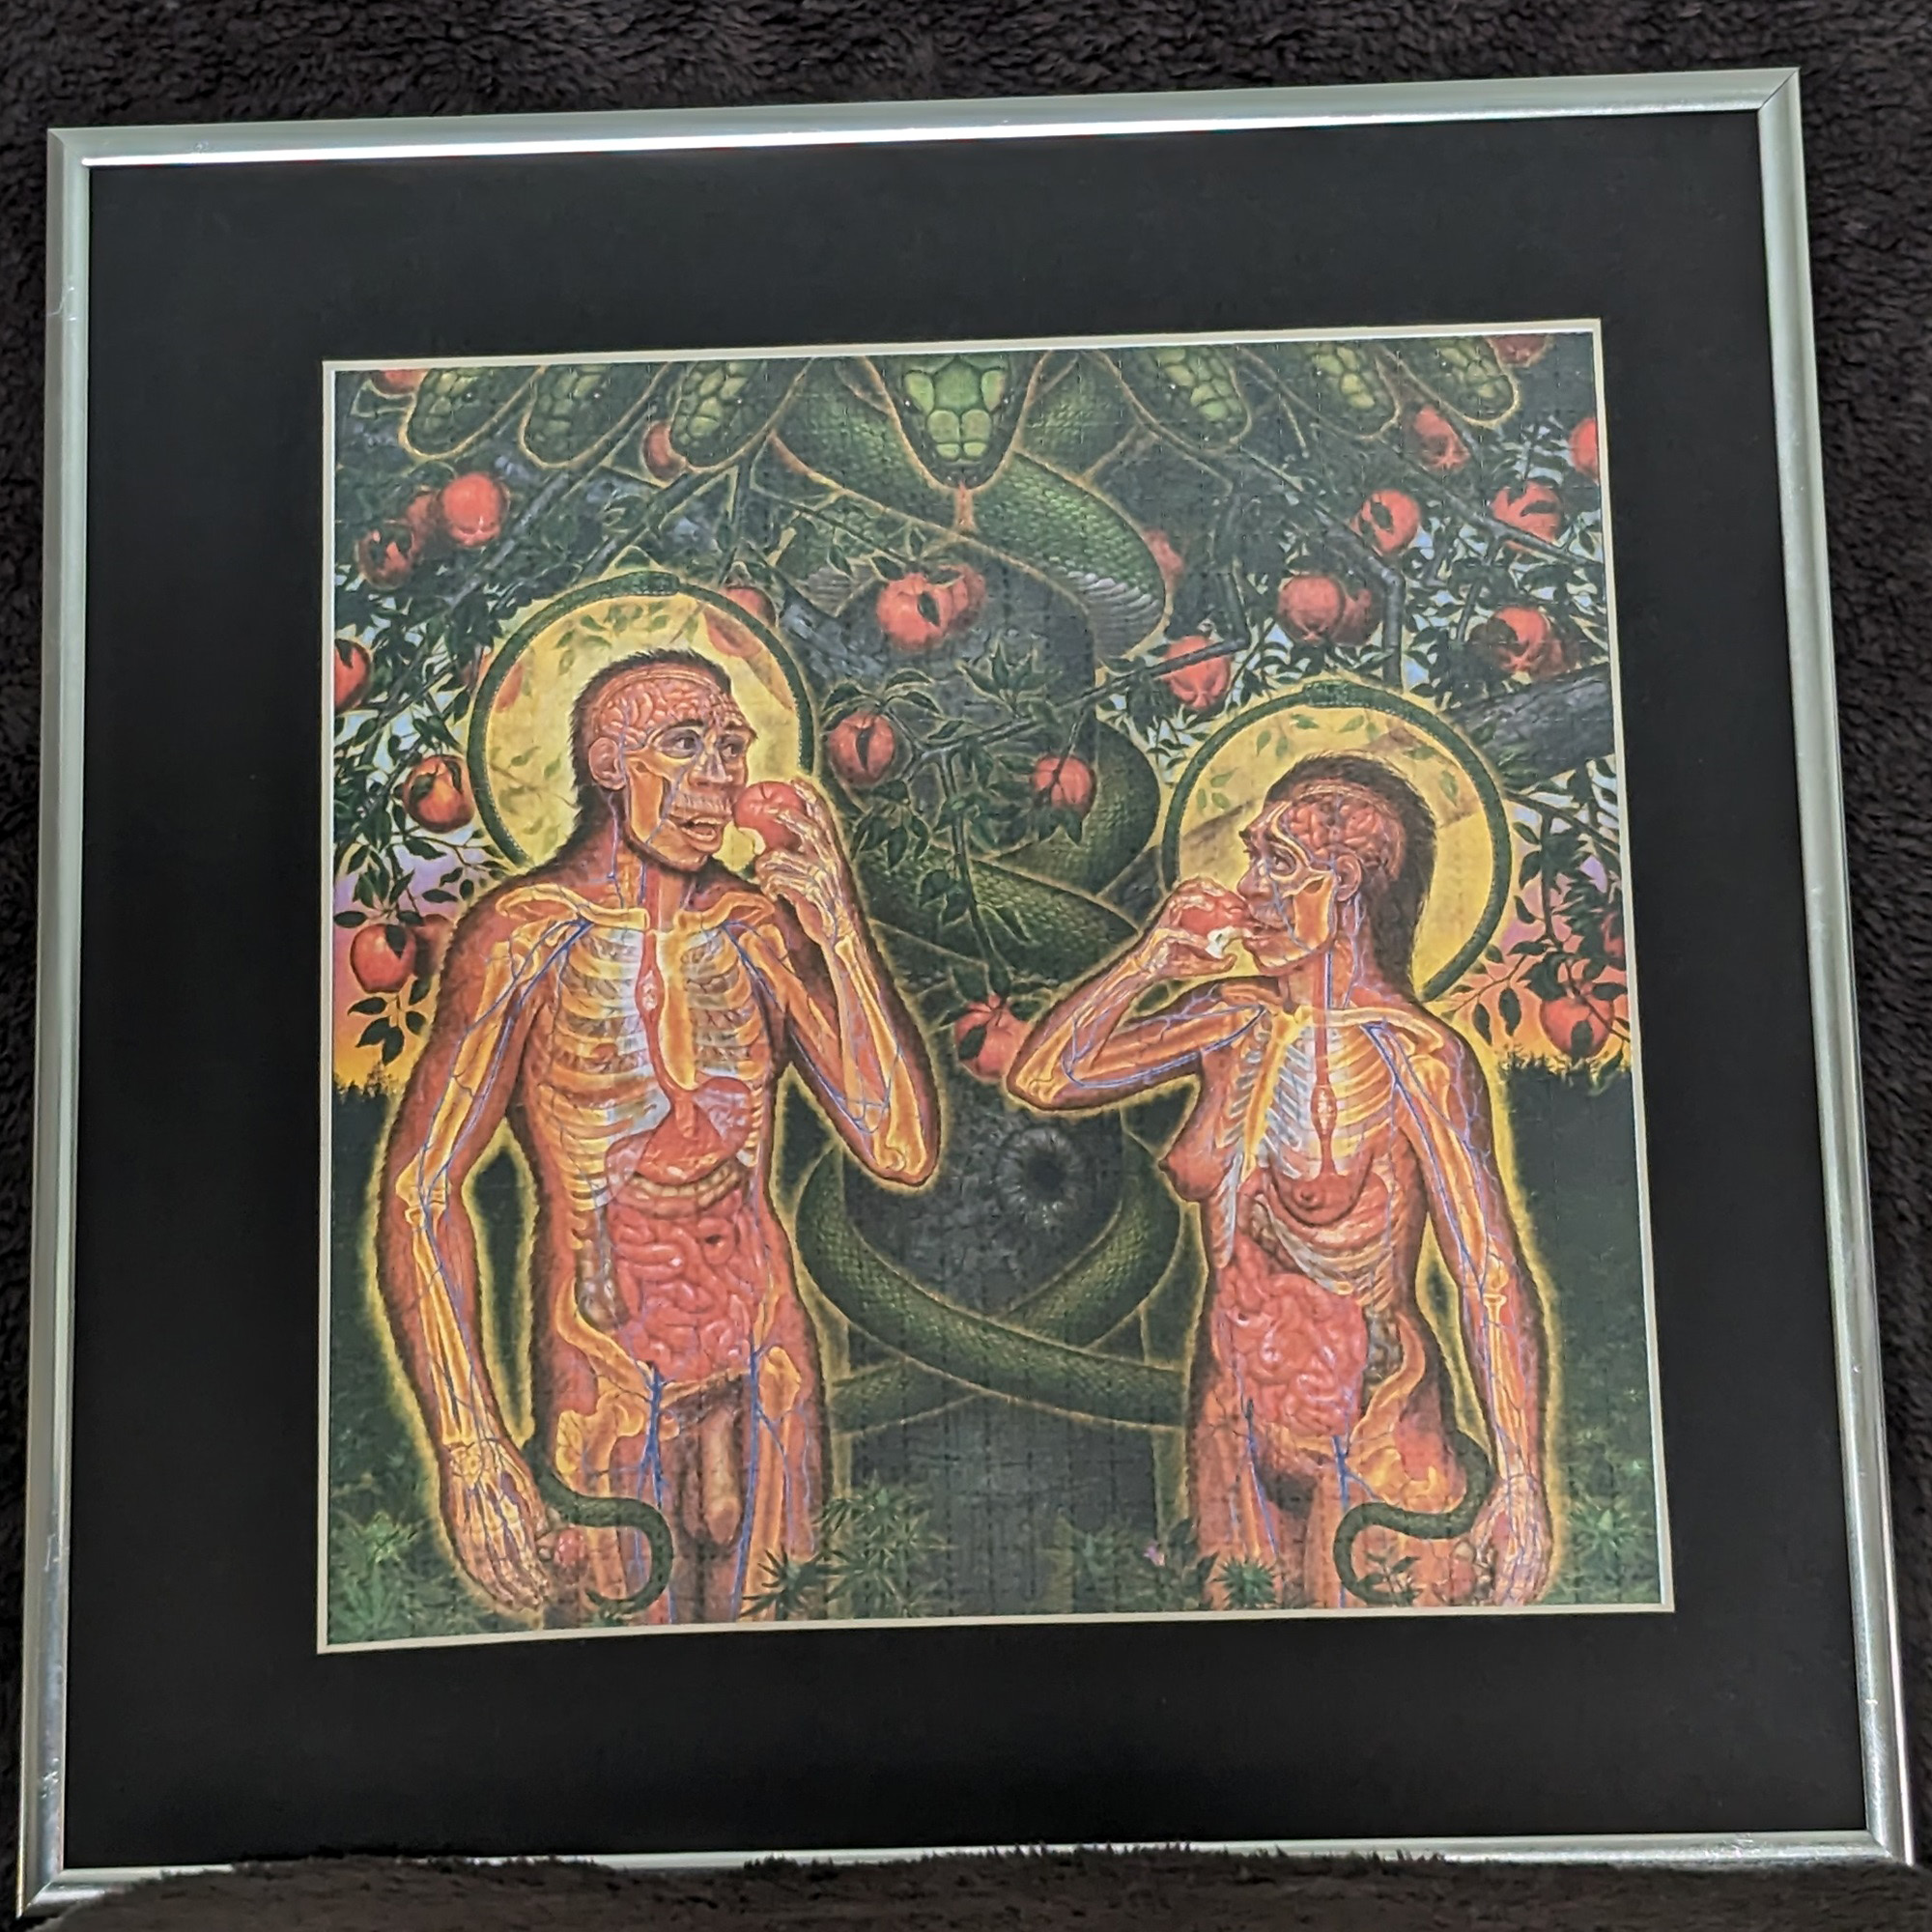 Just an example of how striking this unsigned blotter art appears when it’s encased in a frame.